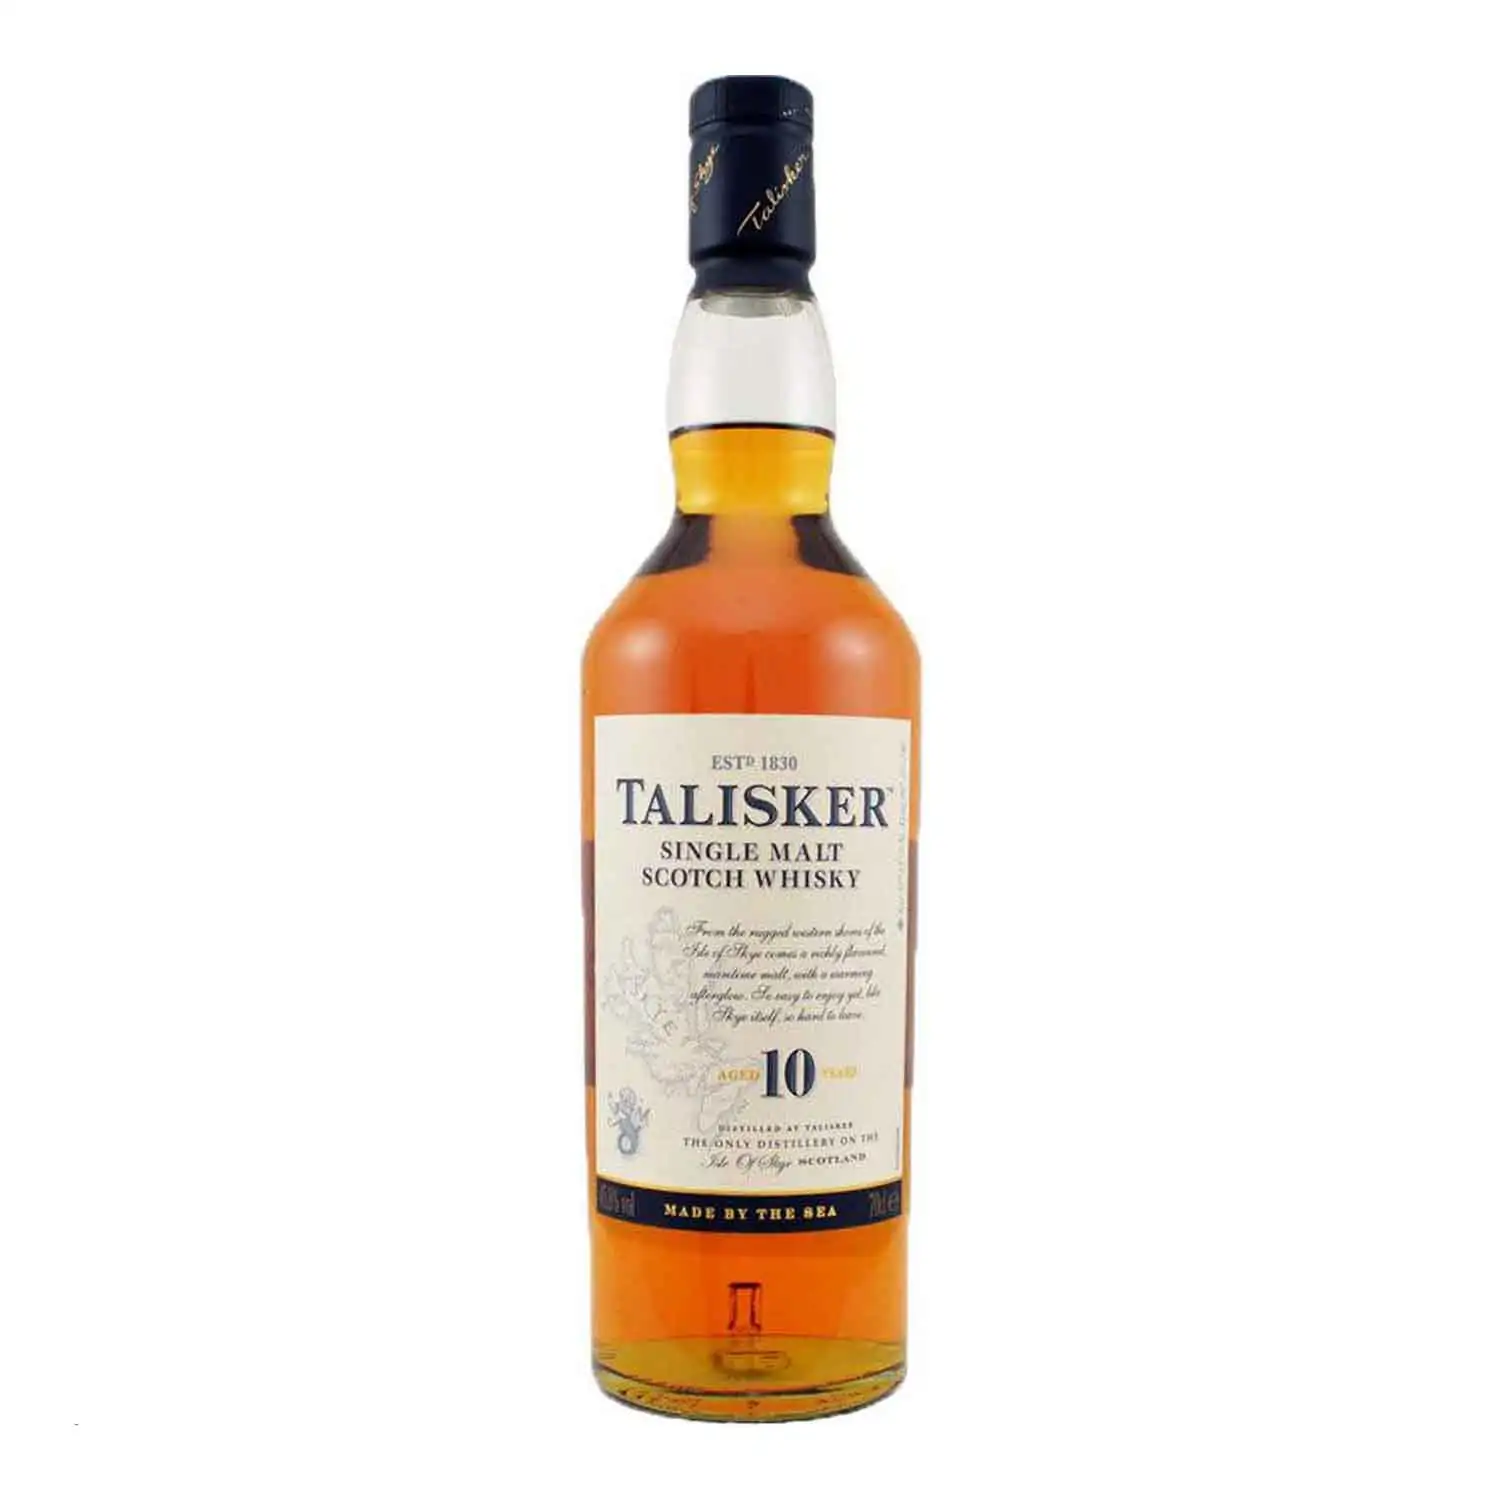 Talisker 10 years 70cl Alc 45,8% - Buy at Real Tobacco